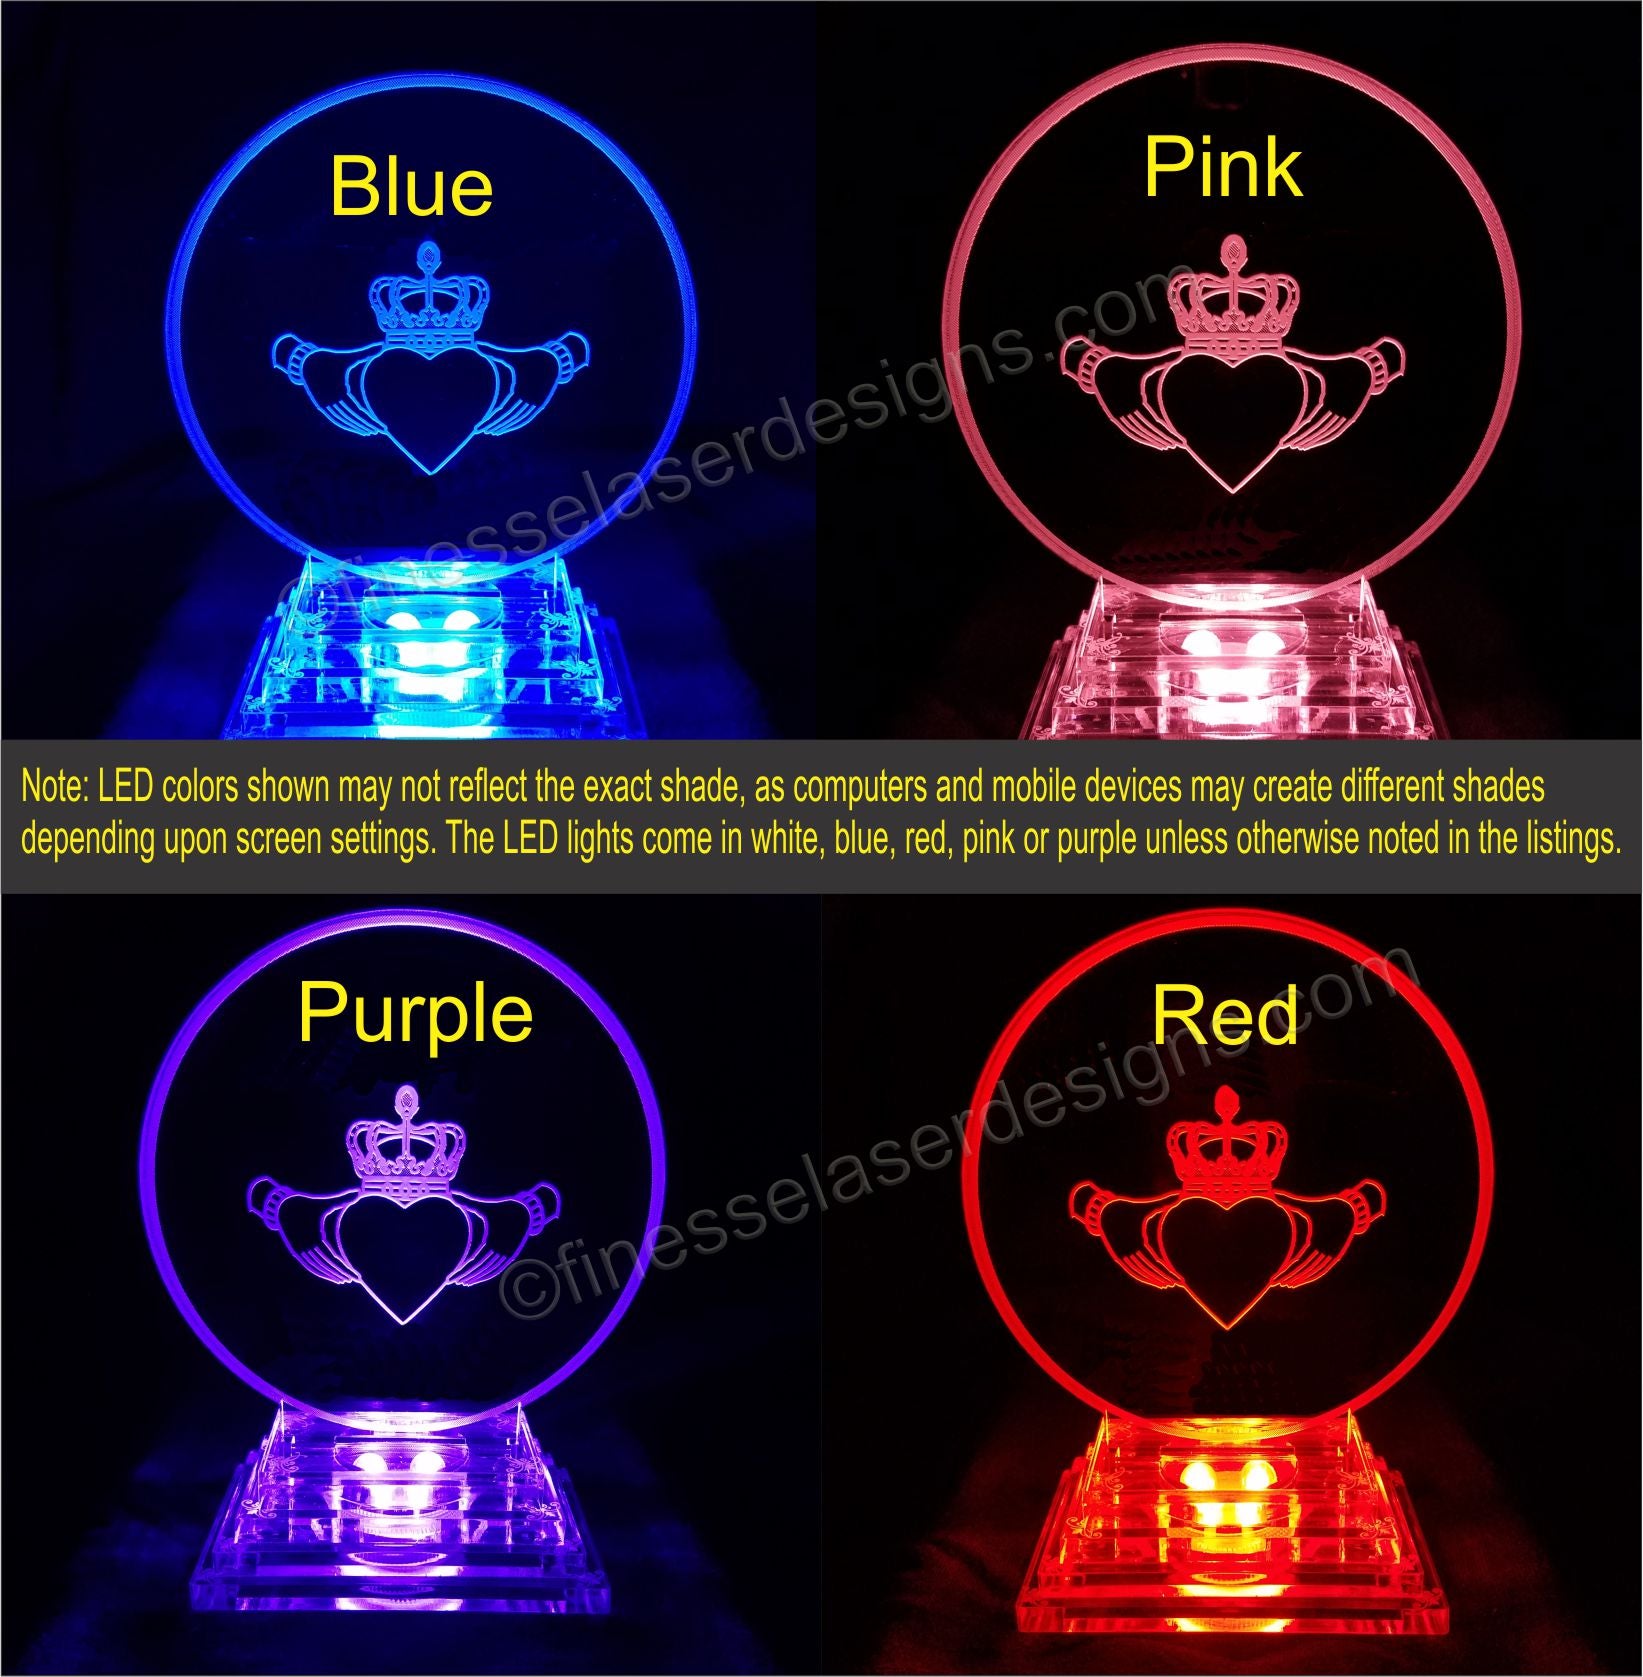 Colored views of acrylic round cake topper designed with a claddagh symbol showing pink, purple, blue, and red lighted views